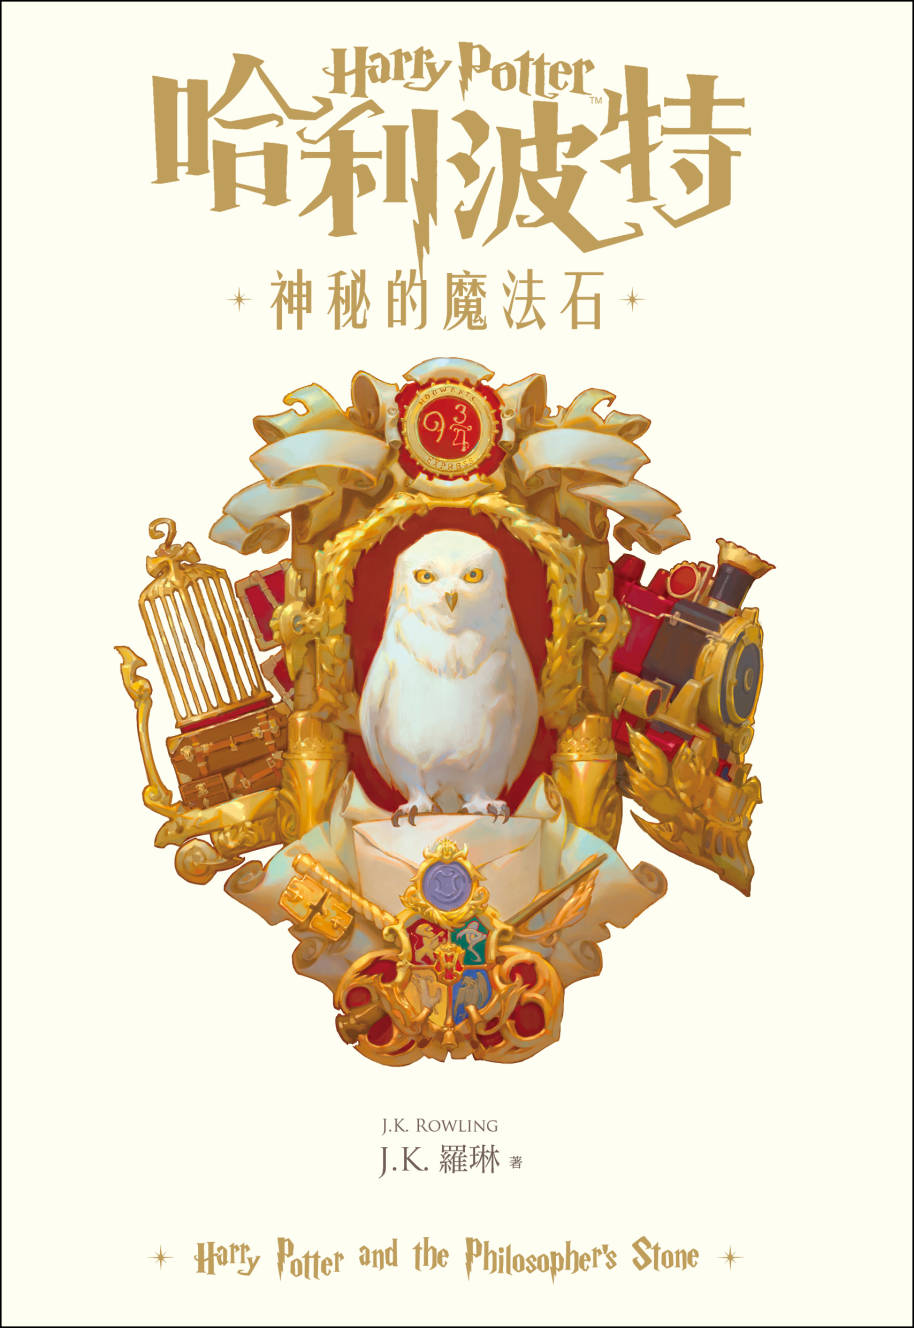 Taiwanese Philosopher's Stone cover